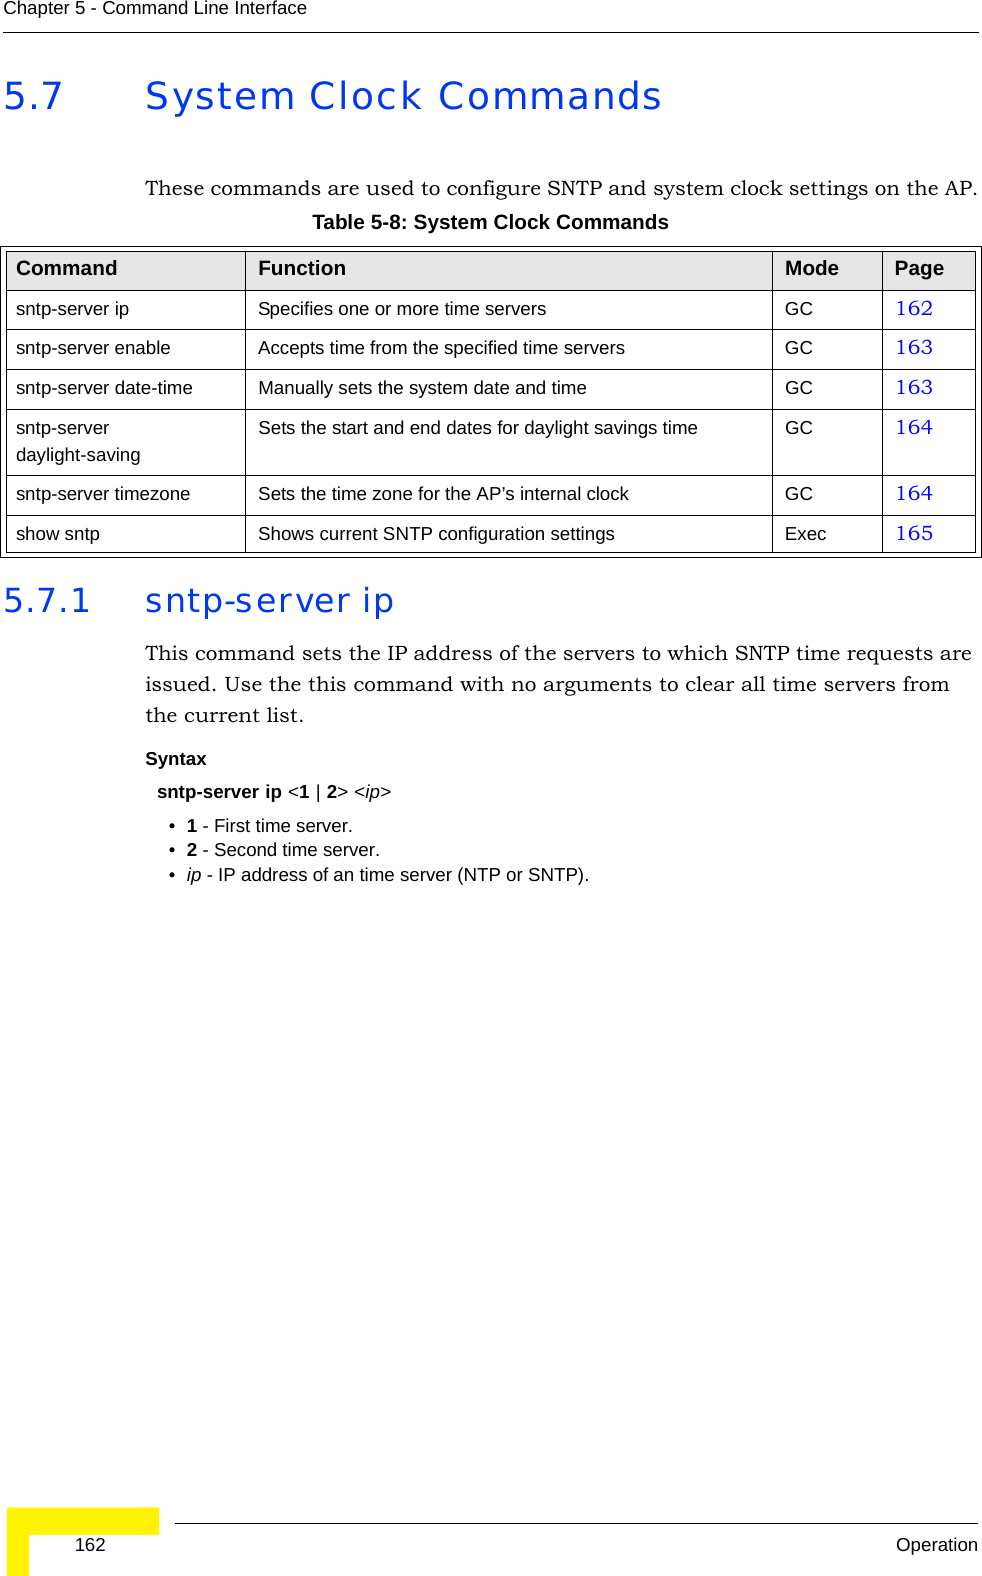  162 OperationChapter 5 - Command Line Interface5.7 System Clock CommandsThese commands are used to configure SNTP and system clock settings on the AP.5.7.1 sntp-server ipThis command sets the IP address of the servers to which SNTP time requests are issued. Use the this command with no arguments to clear all time servers from the current list.Syntaxsntp-server ip &lt;1 | 2&gt; &lt;ip&gt;•1 - First time server.•2 - Second time server.•ip - IP address of an time server (NTP or SNTP). Table 5-8: System Clock CommandsCommand Function Mode Pagesntp-server ip Specifies one or more time servers GC 162sntp-server enable  Accepts time from the specified time servers GC 163sntp-server date-time Manually sets the system date and time GC 163sntp-server daylight-savingSets the start and end dates for daylight savings time GC 164sntp-server timezone Sets the time zone for the AP’s internal clock GC 164show sntp Shows current SNTP configuration settings Exec  165